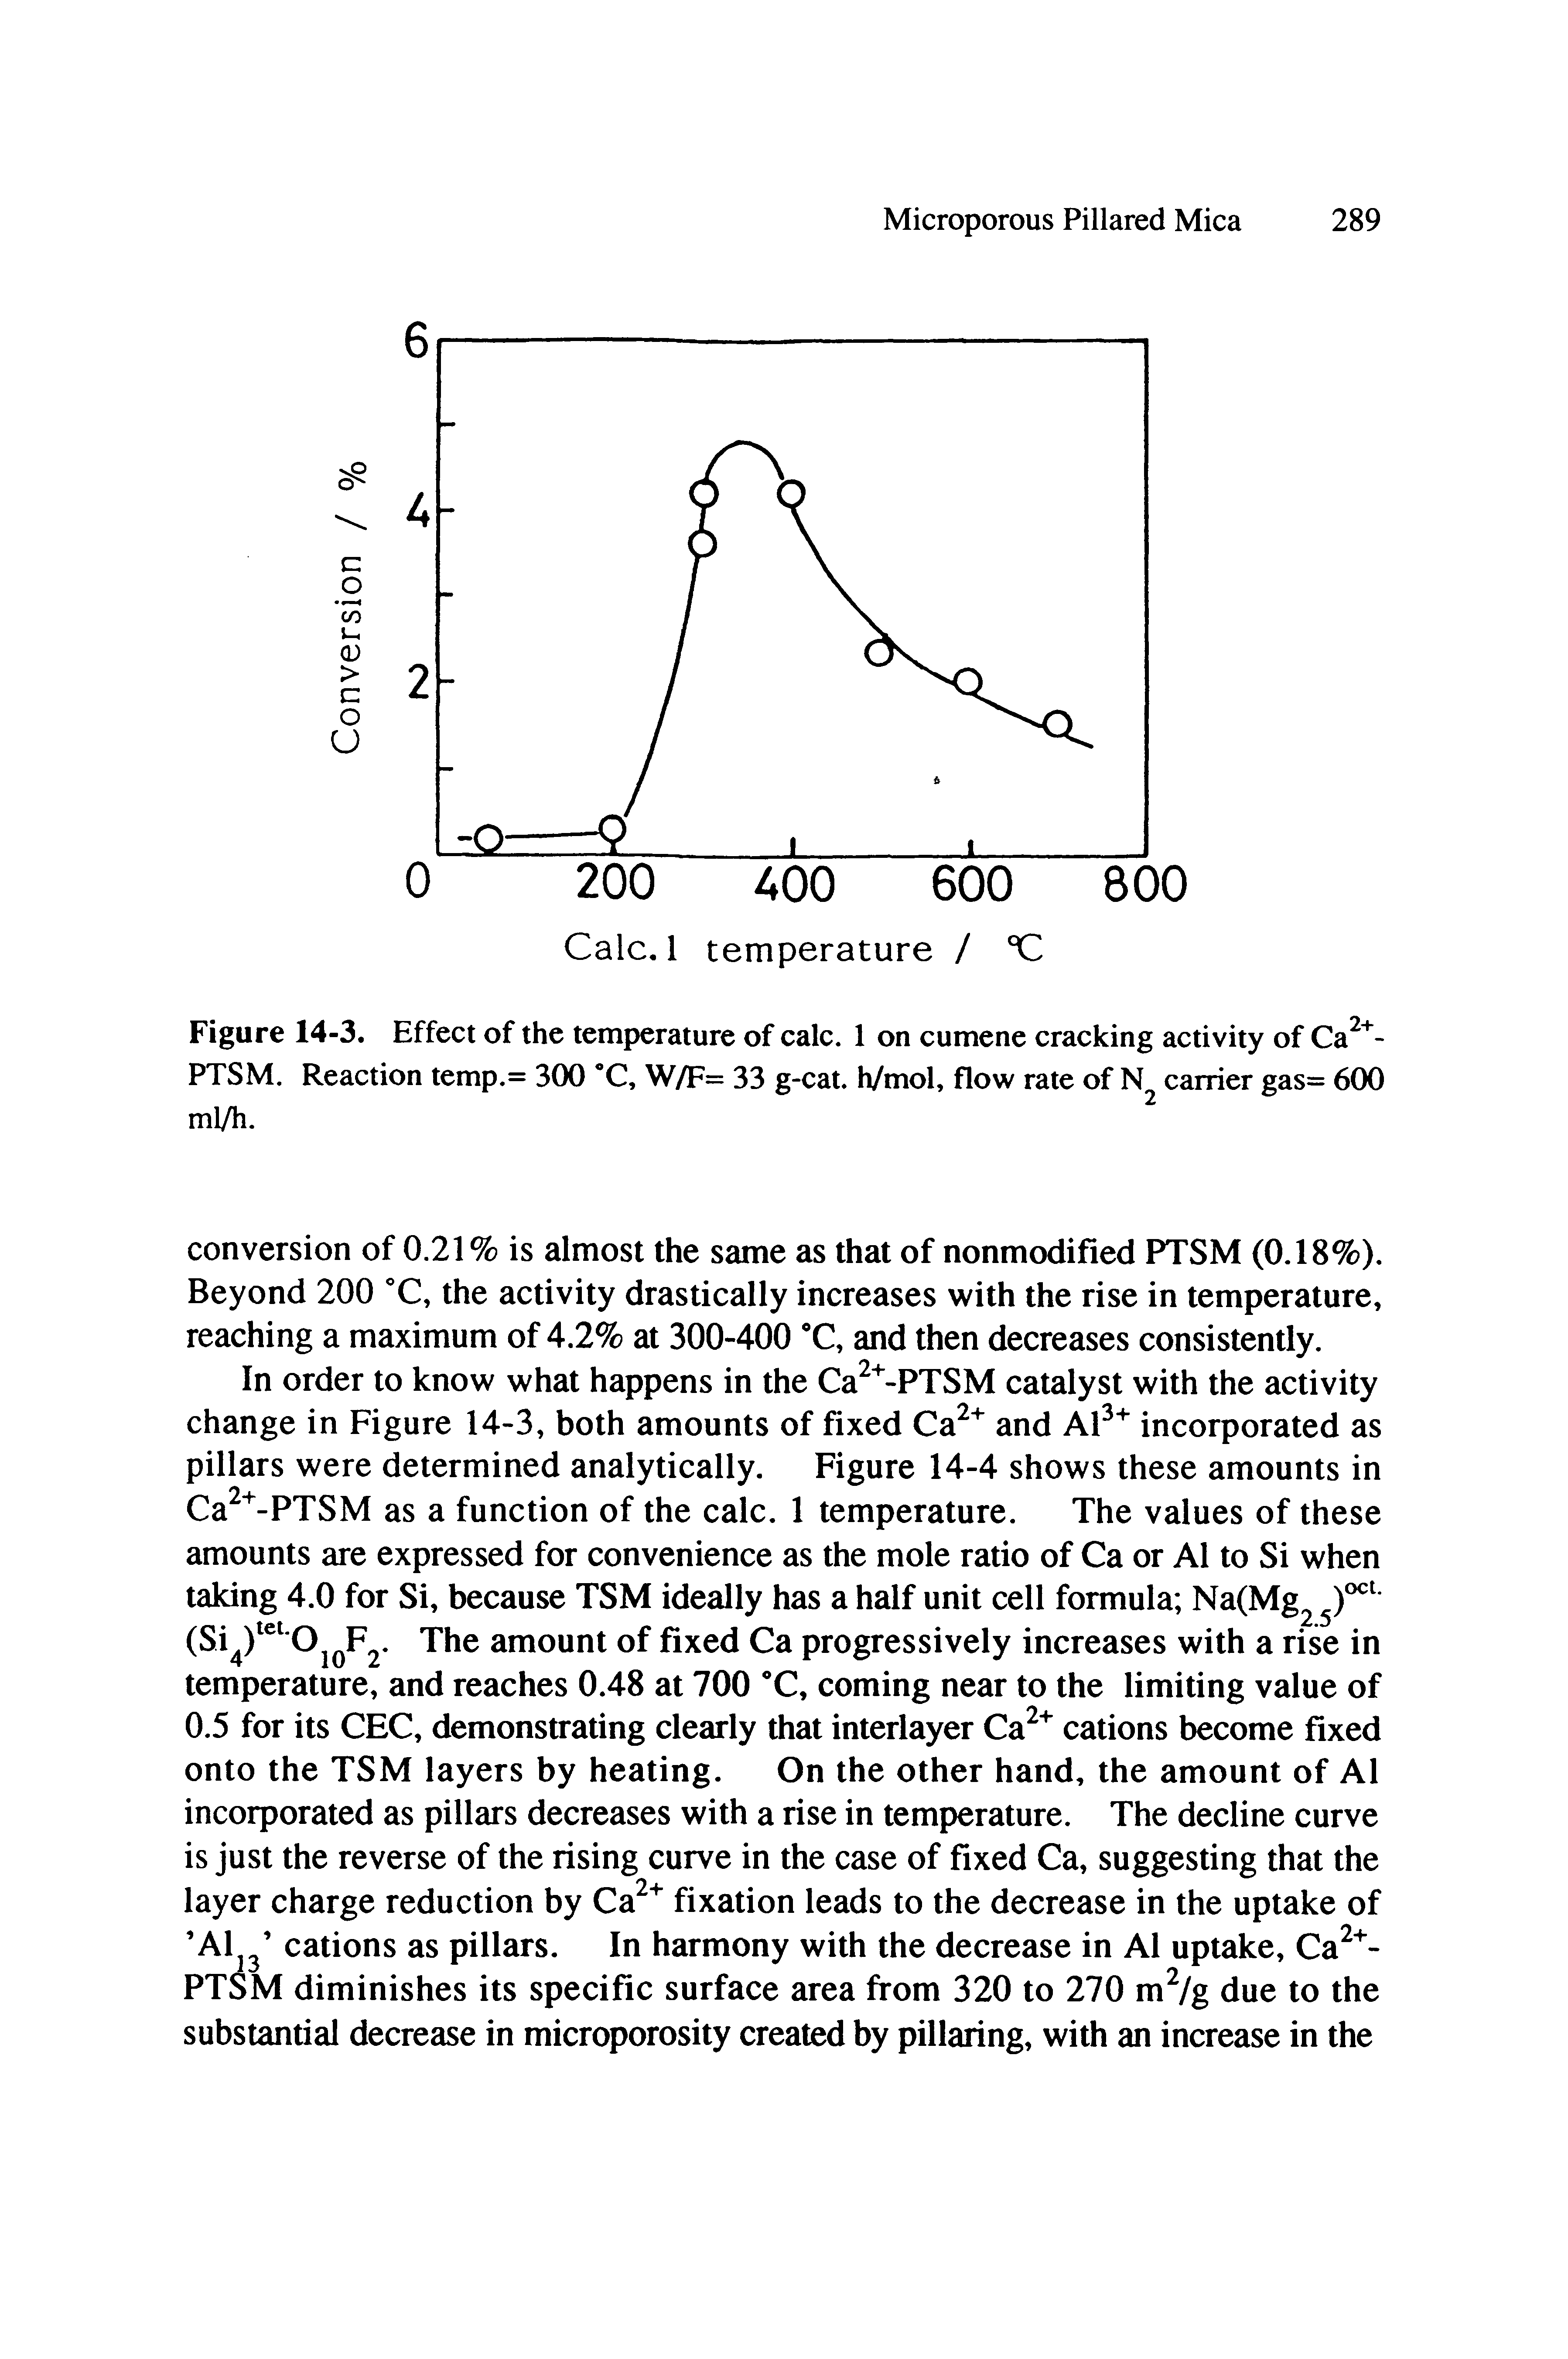 Figure 14-3. Effect of the temperature of calc. 1 on cumene cracking activity of Ca -PTSM. Reaction temp.= 300 C, W/F= 33 g-cat. h/mol, flow rate of carrier gas= 600 ml/h.